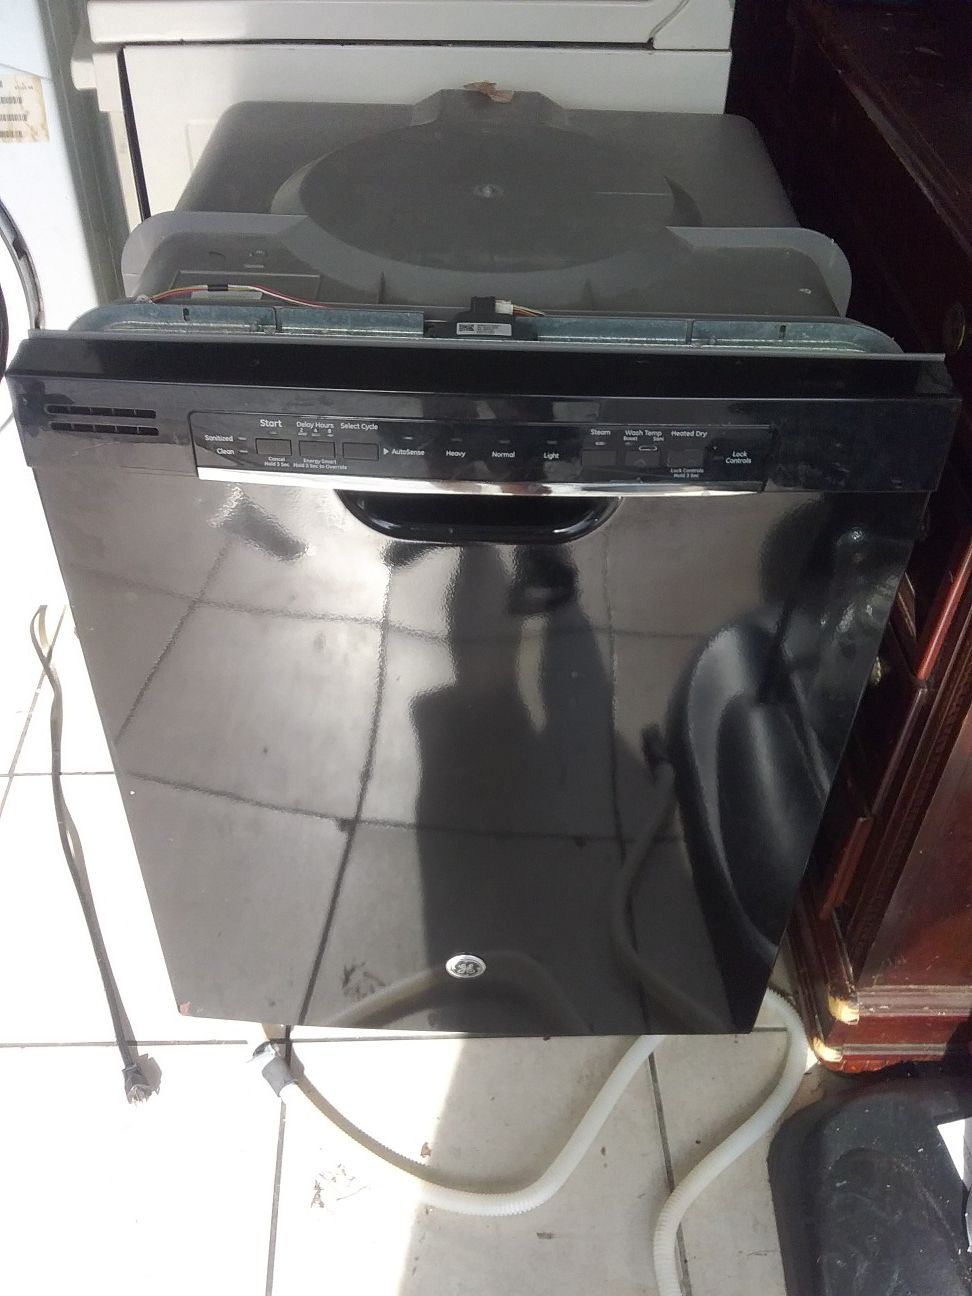 Black ge dishwasher with plastic tub in excellent working condition